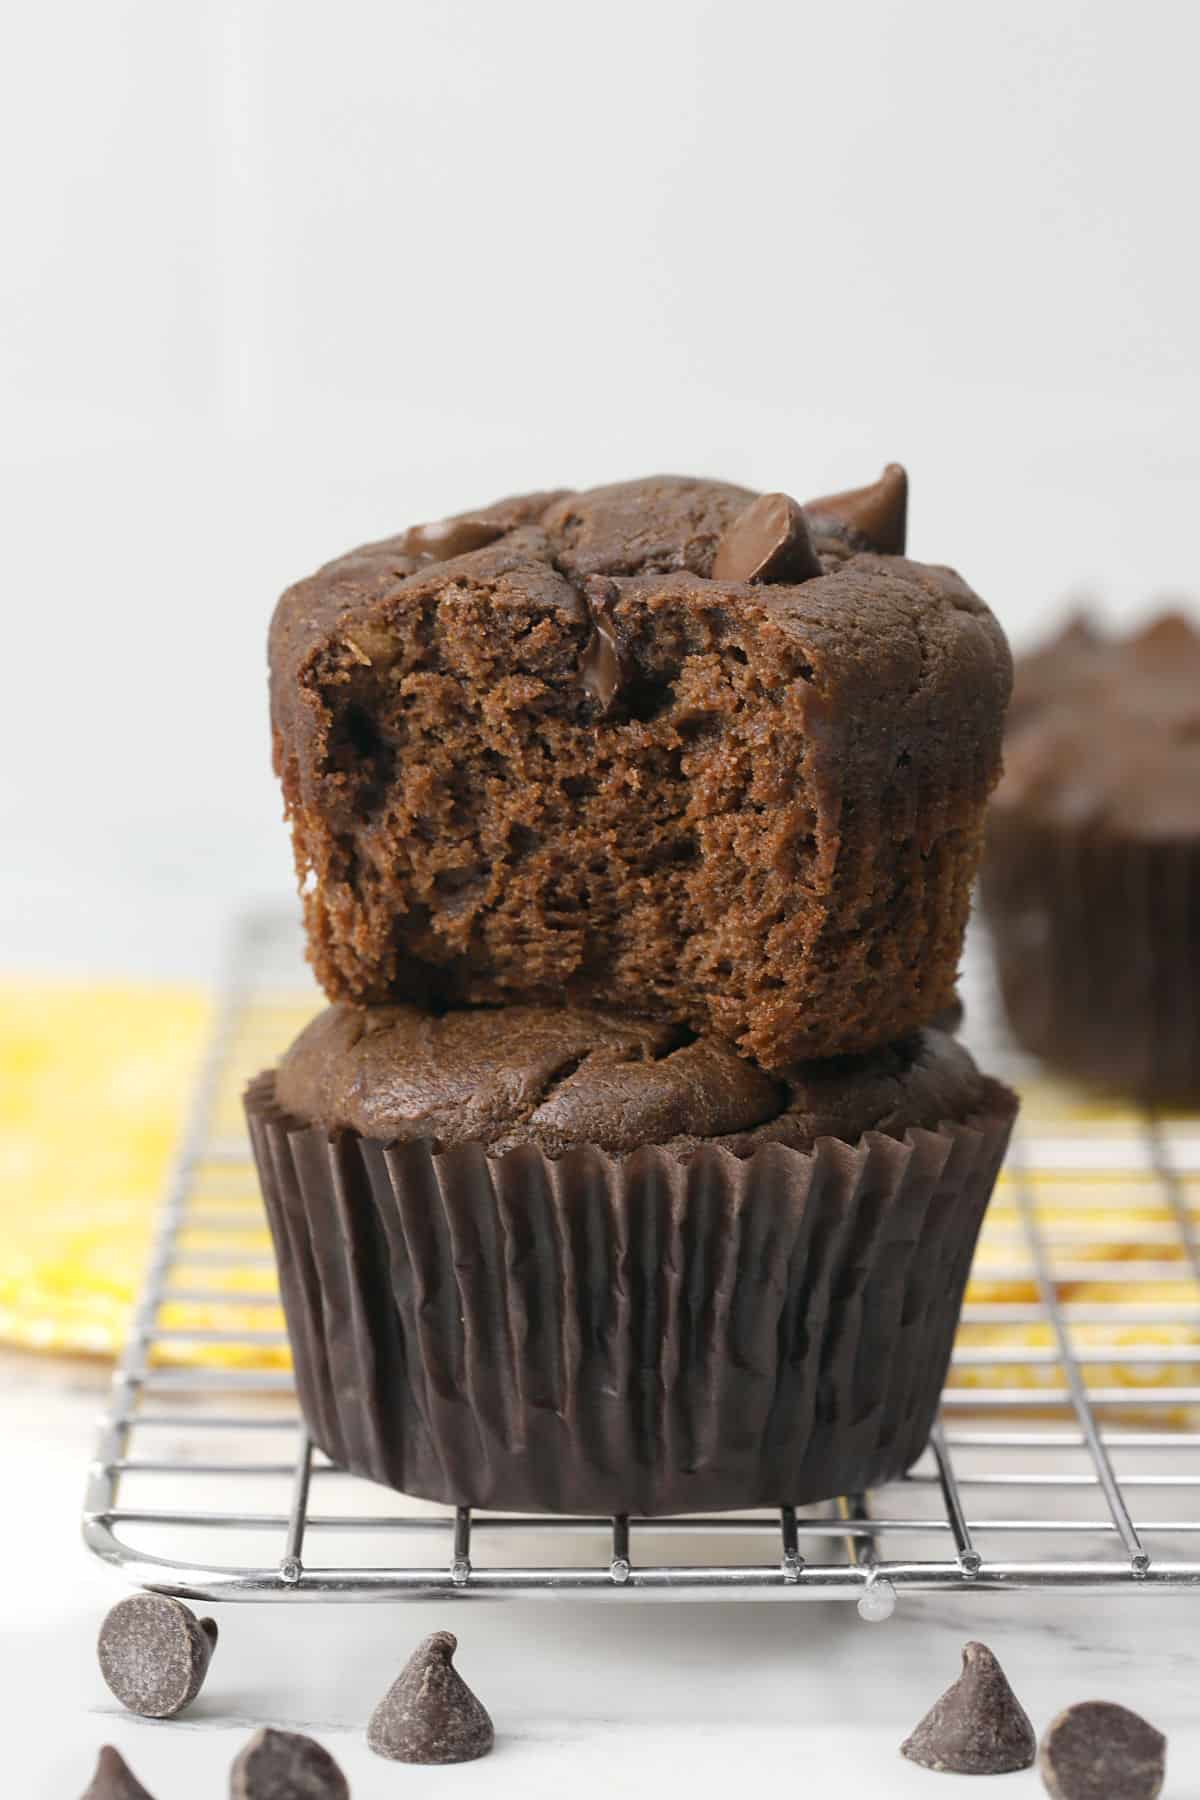 Two chocolate peanut butter banana muffins stacked, one with a bite missing.